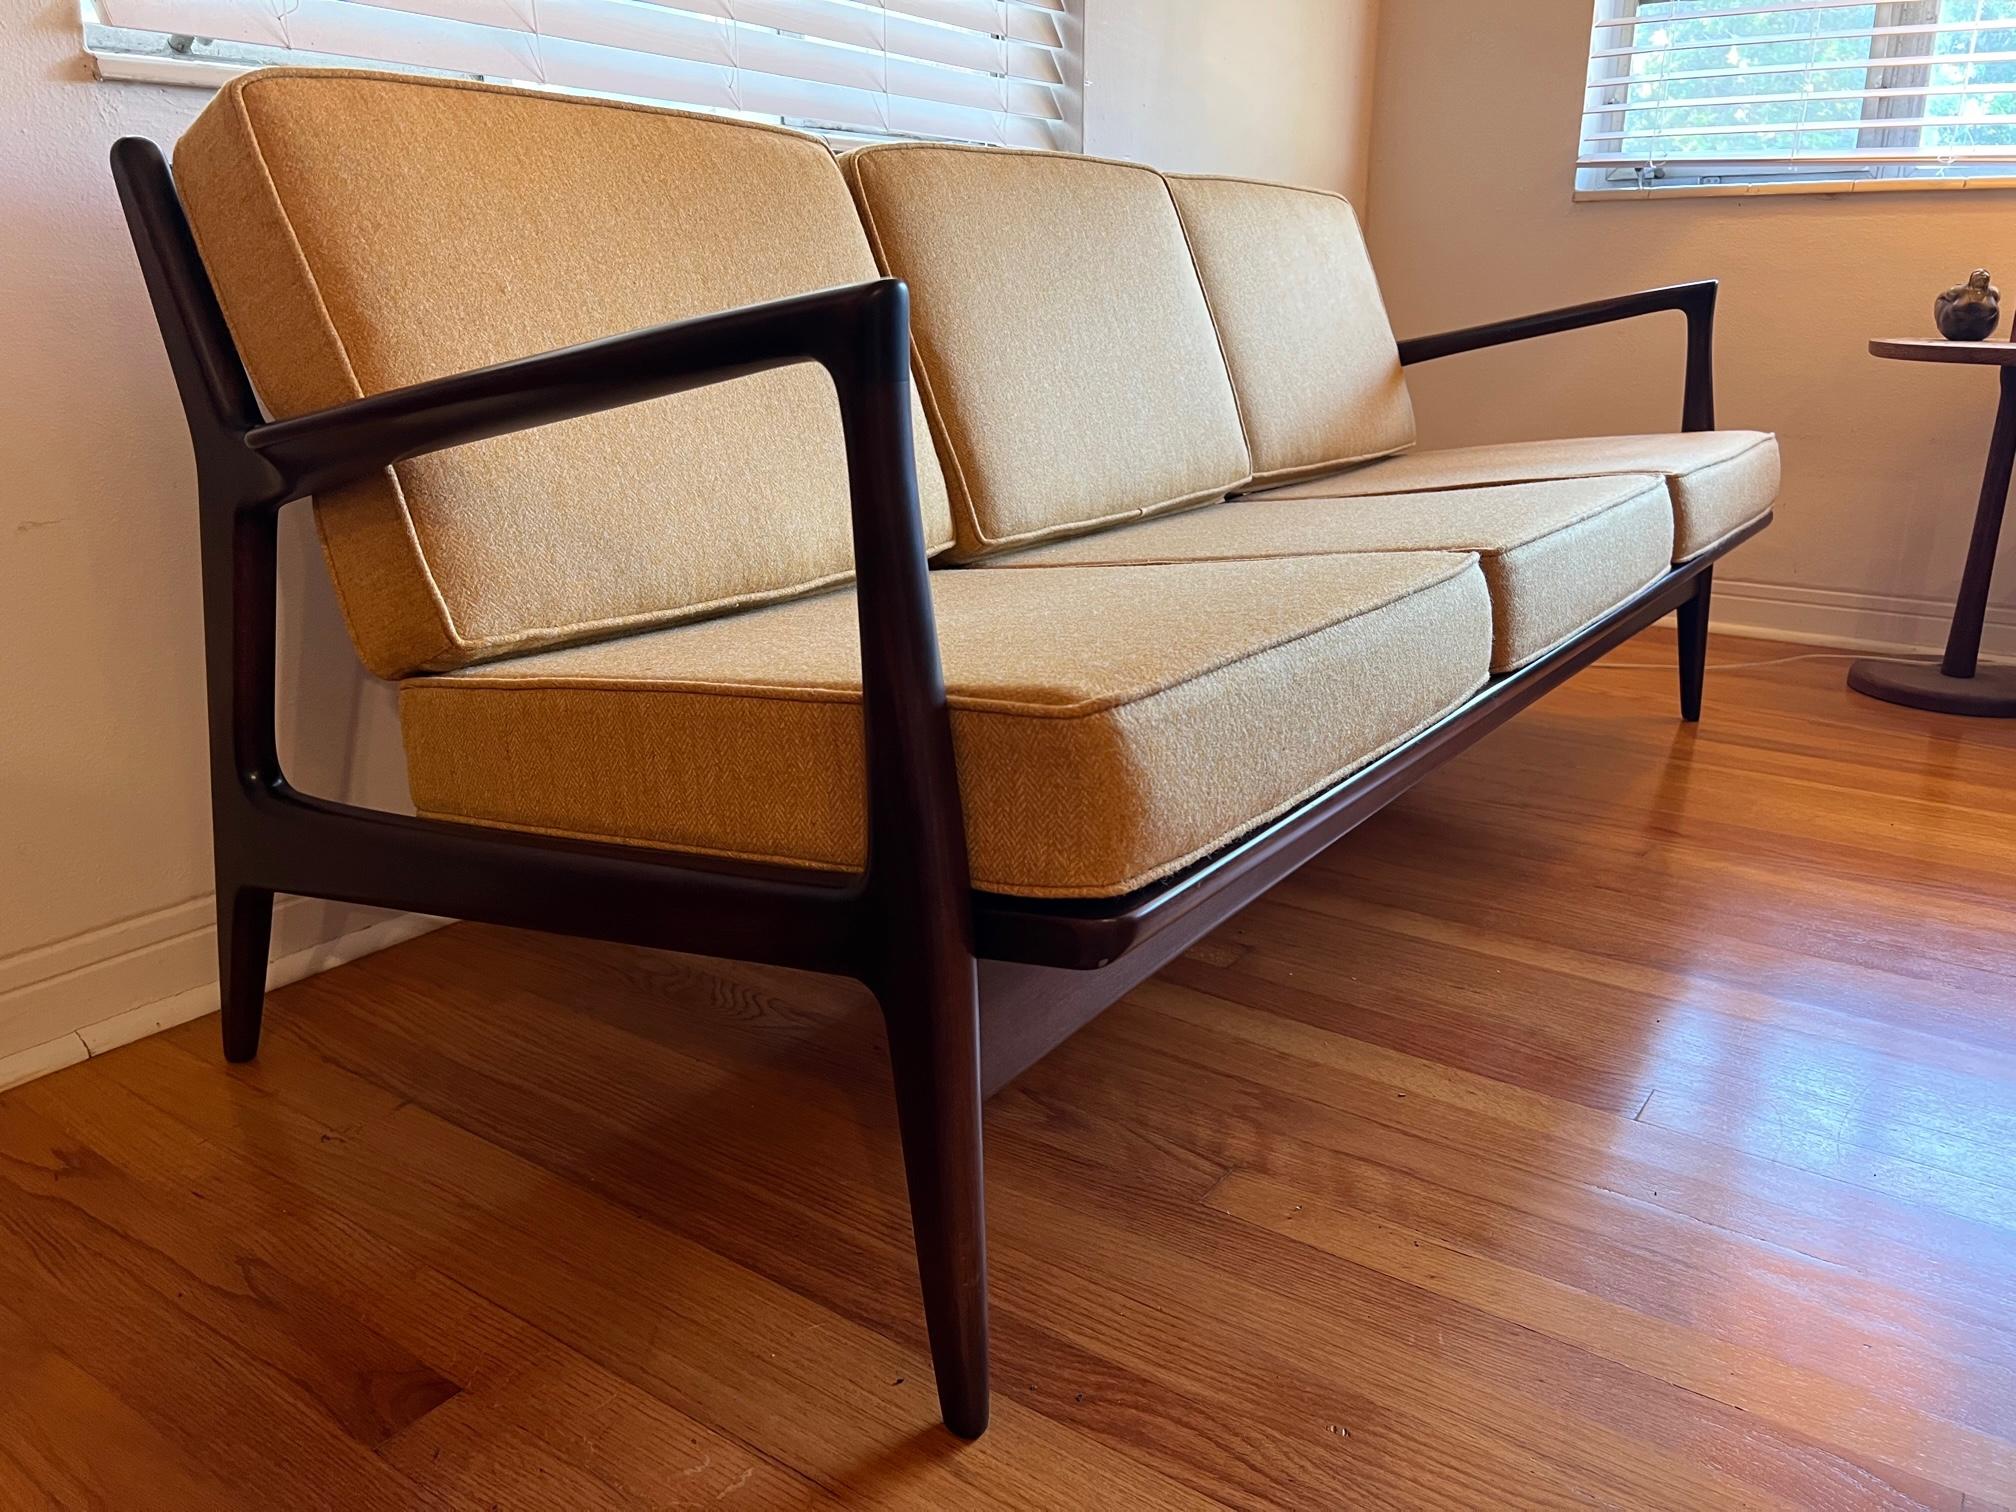 A classic three seat sofa designed by IB Kofod Larsen, manufactured in Denmark and distributed through Selig. Frames restored, new straps, reupholstered in British ochre colored tweed (100% wool content). 